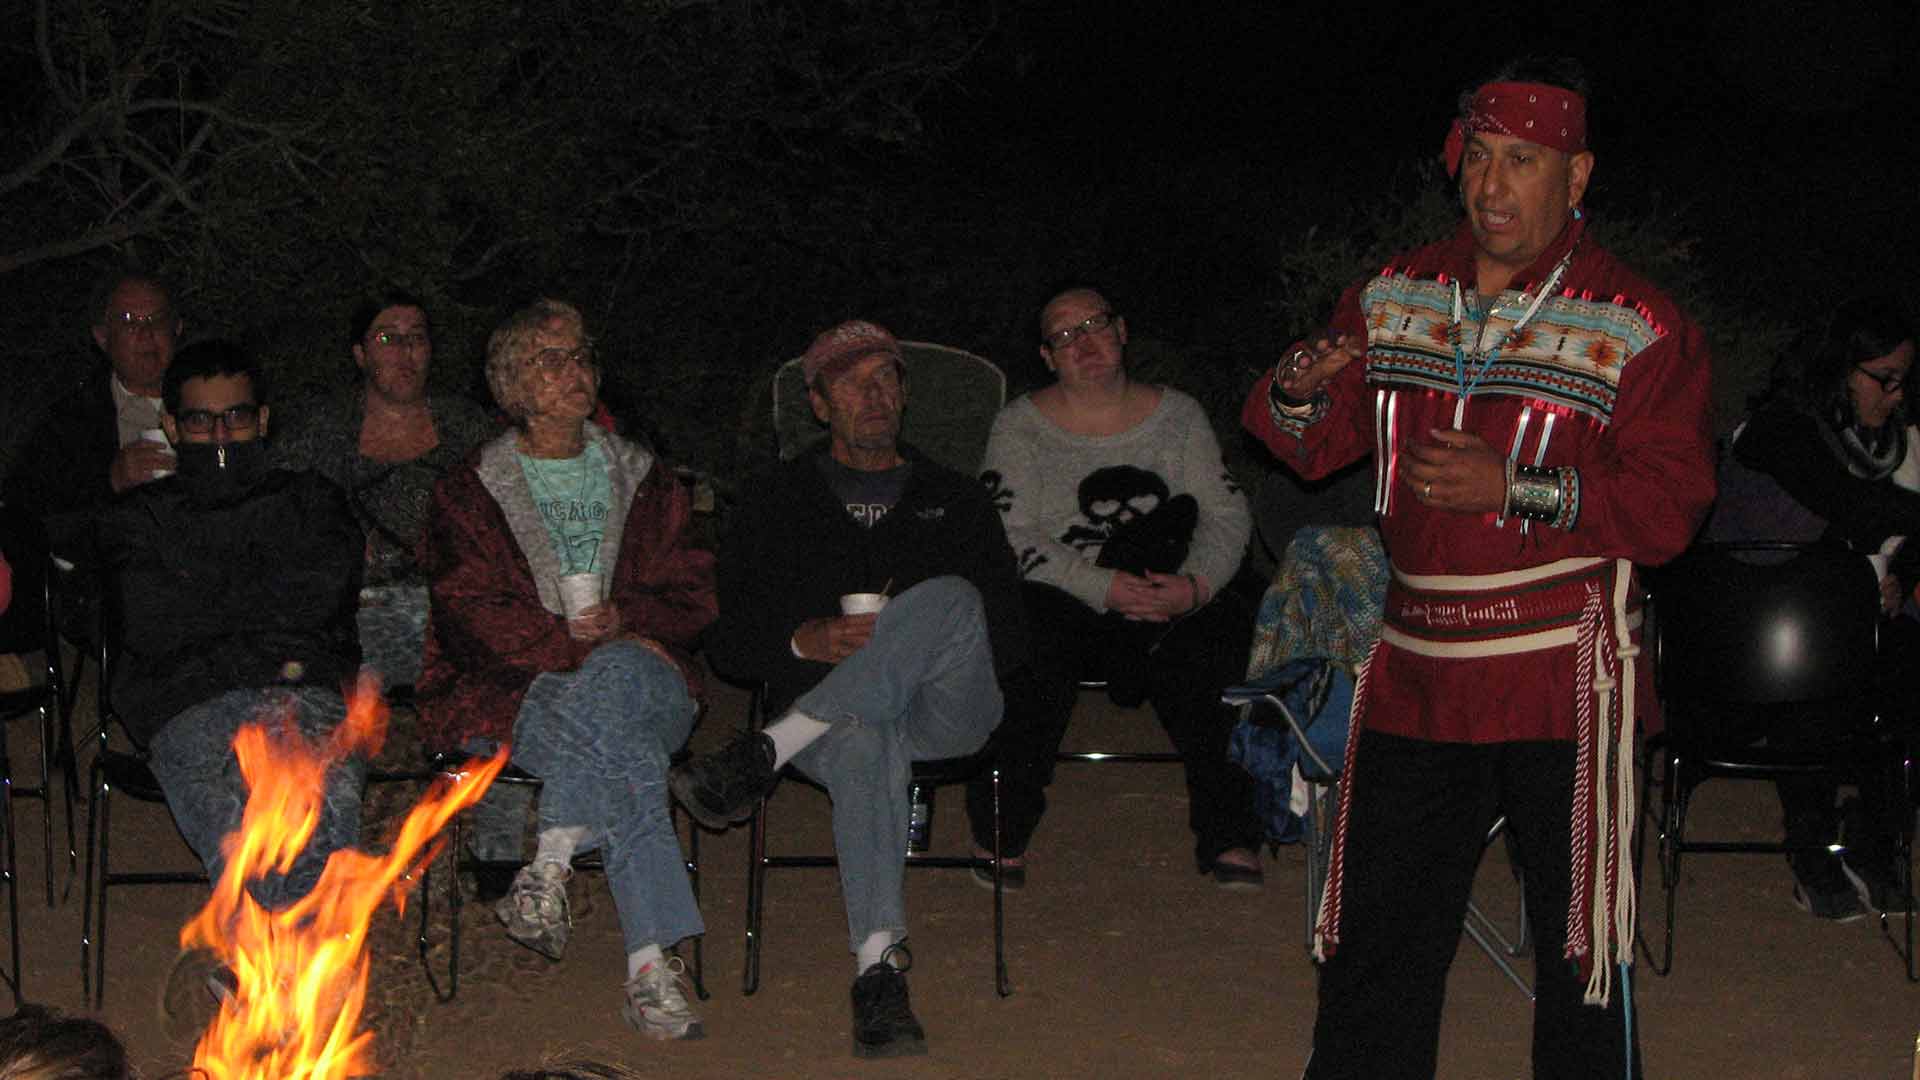 Alex Mares speaks to a seated group around an evening campfire